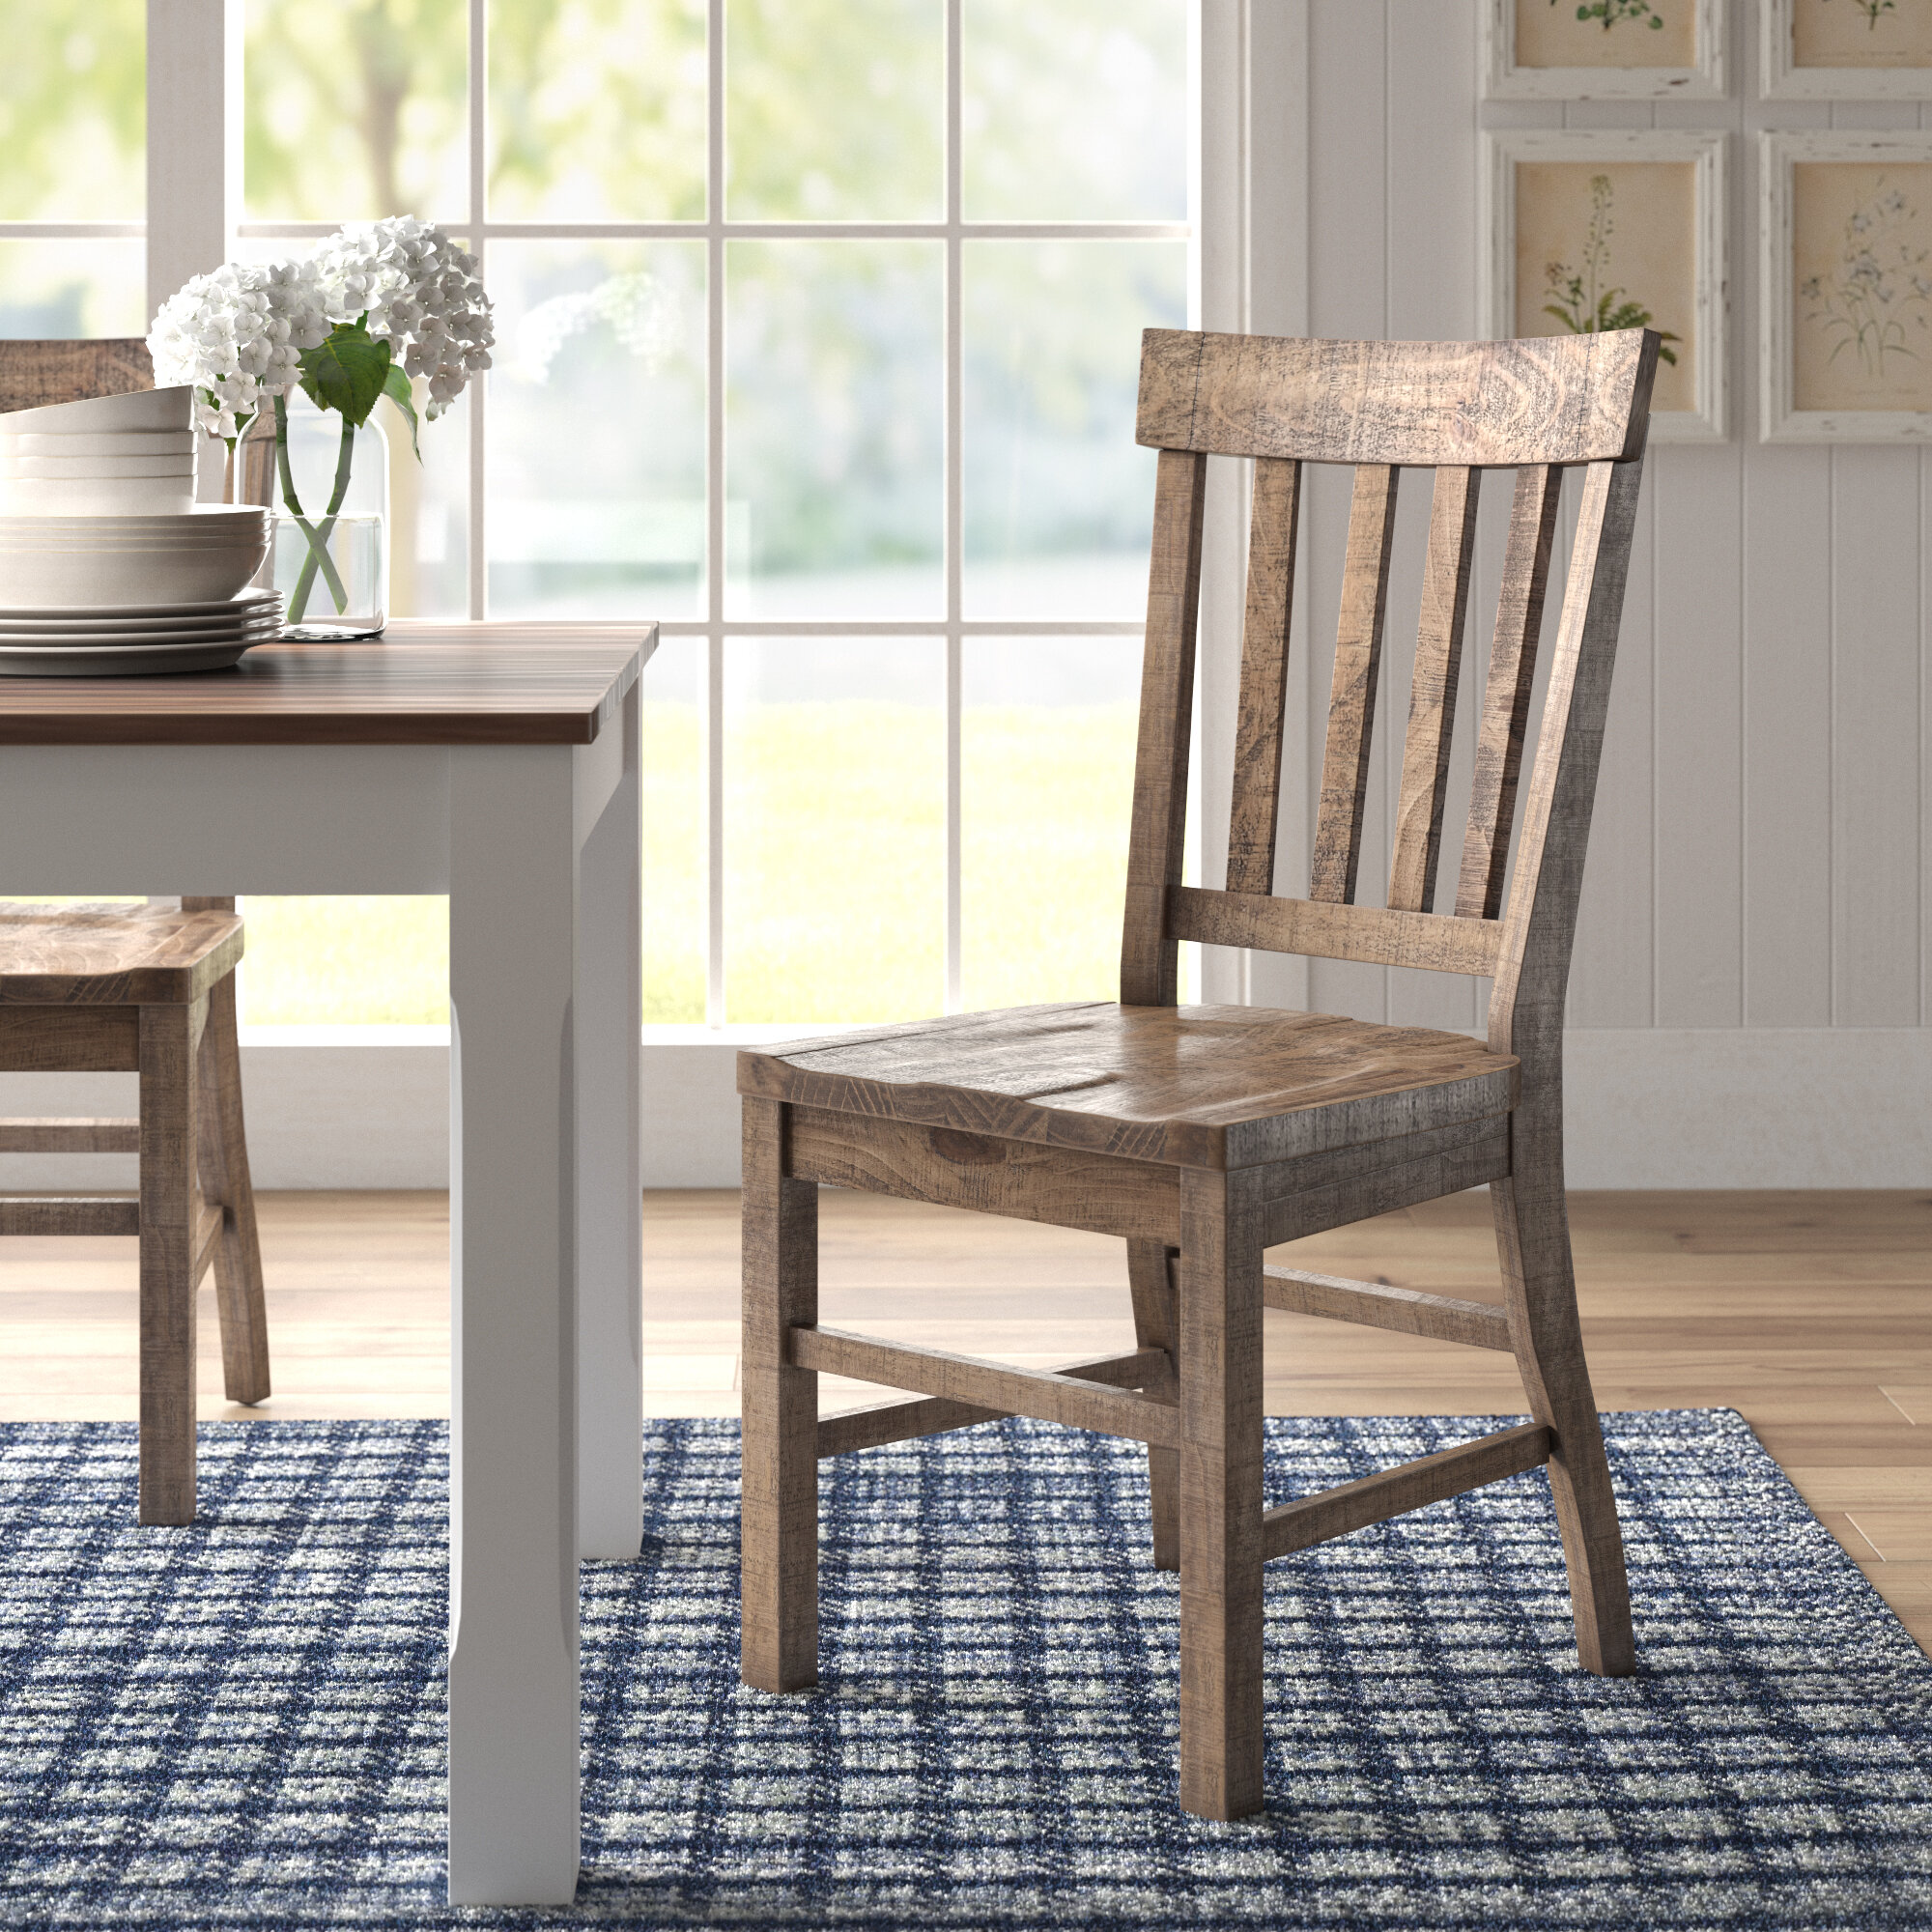 Farmhouse Wood Dining Chairs  . Solid Wood Farmhouse Style Dining Table And Six Sturdy Chairs.